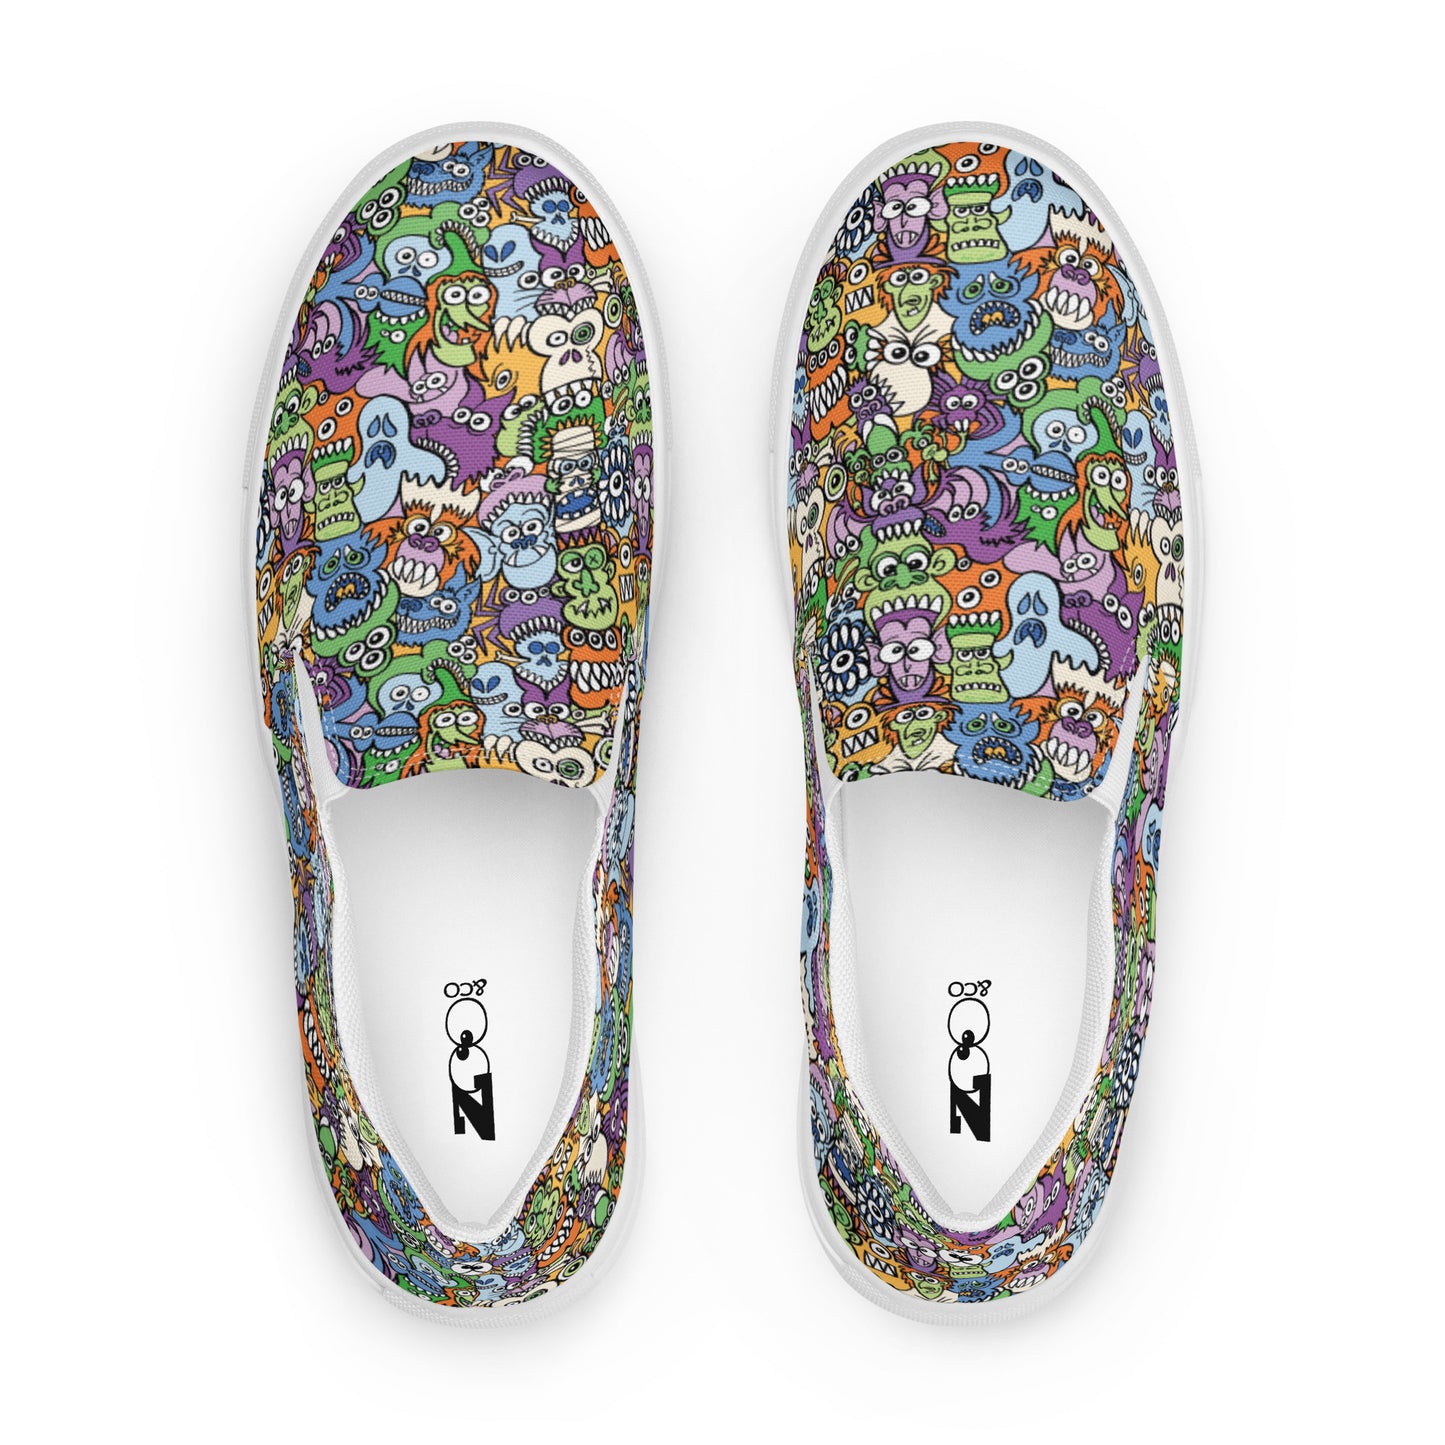 All the spooky Halloween monsters in a pattern design Men’s slip-on canvas shoes. Top view